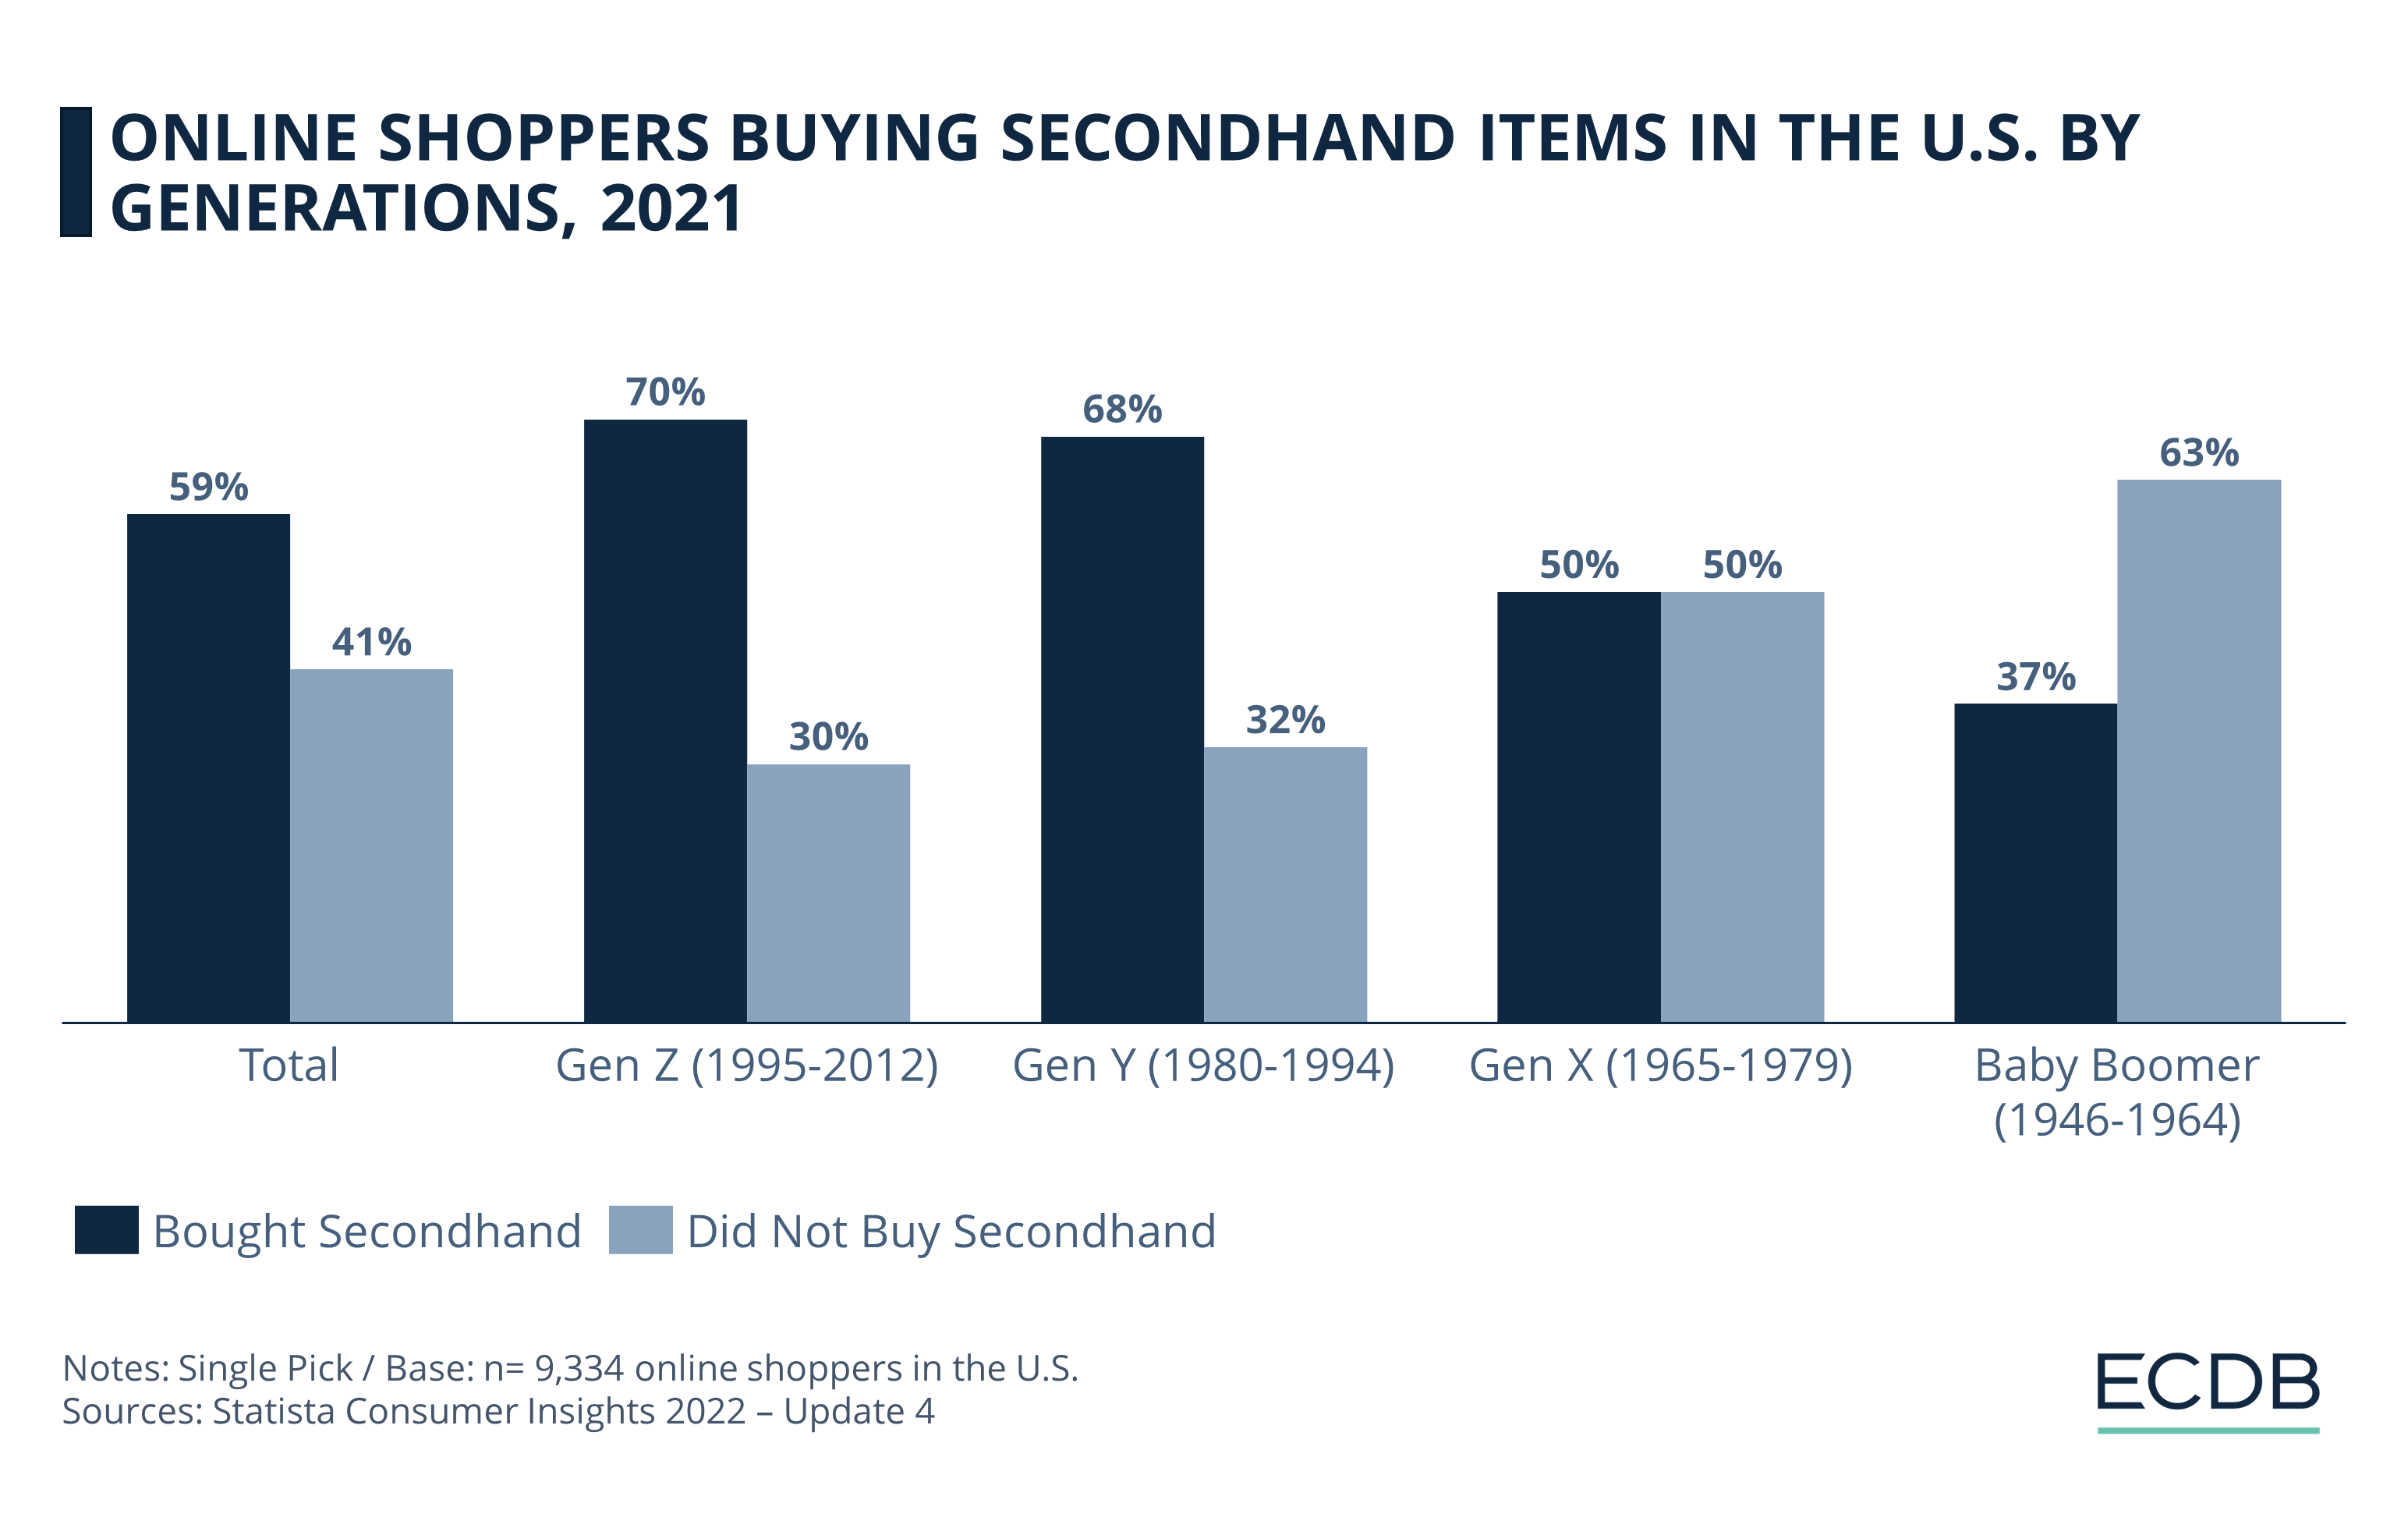 Online Shoppers Buying Secondhand Items in the U.S. by Generations, 2021